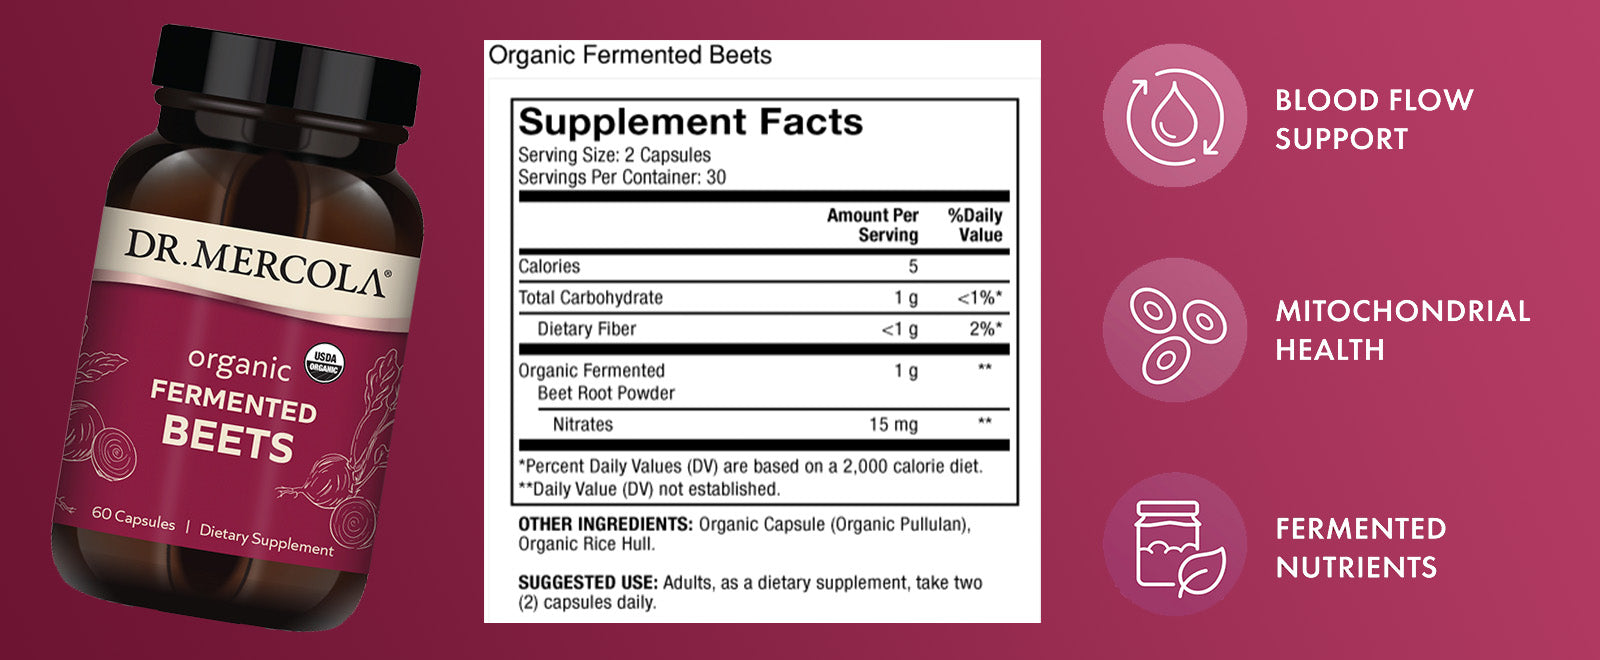 Organic Fermented Beets - EBoost Your Vitality with Organic Fermented Beets: Nature's Nitric Oxide Powerhouse!